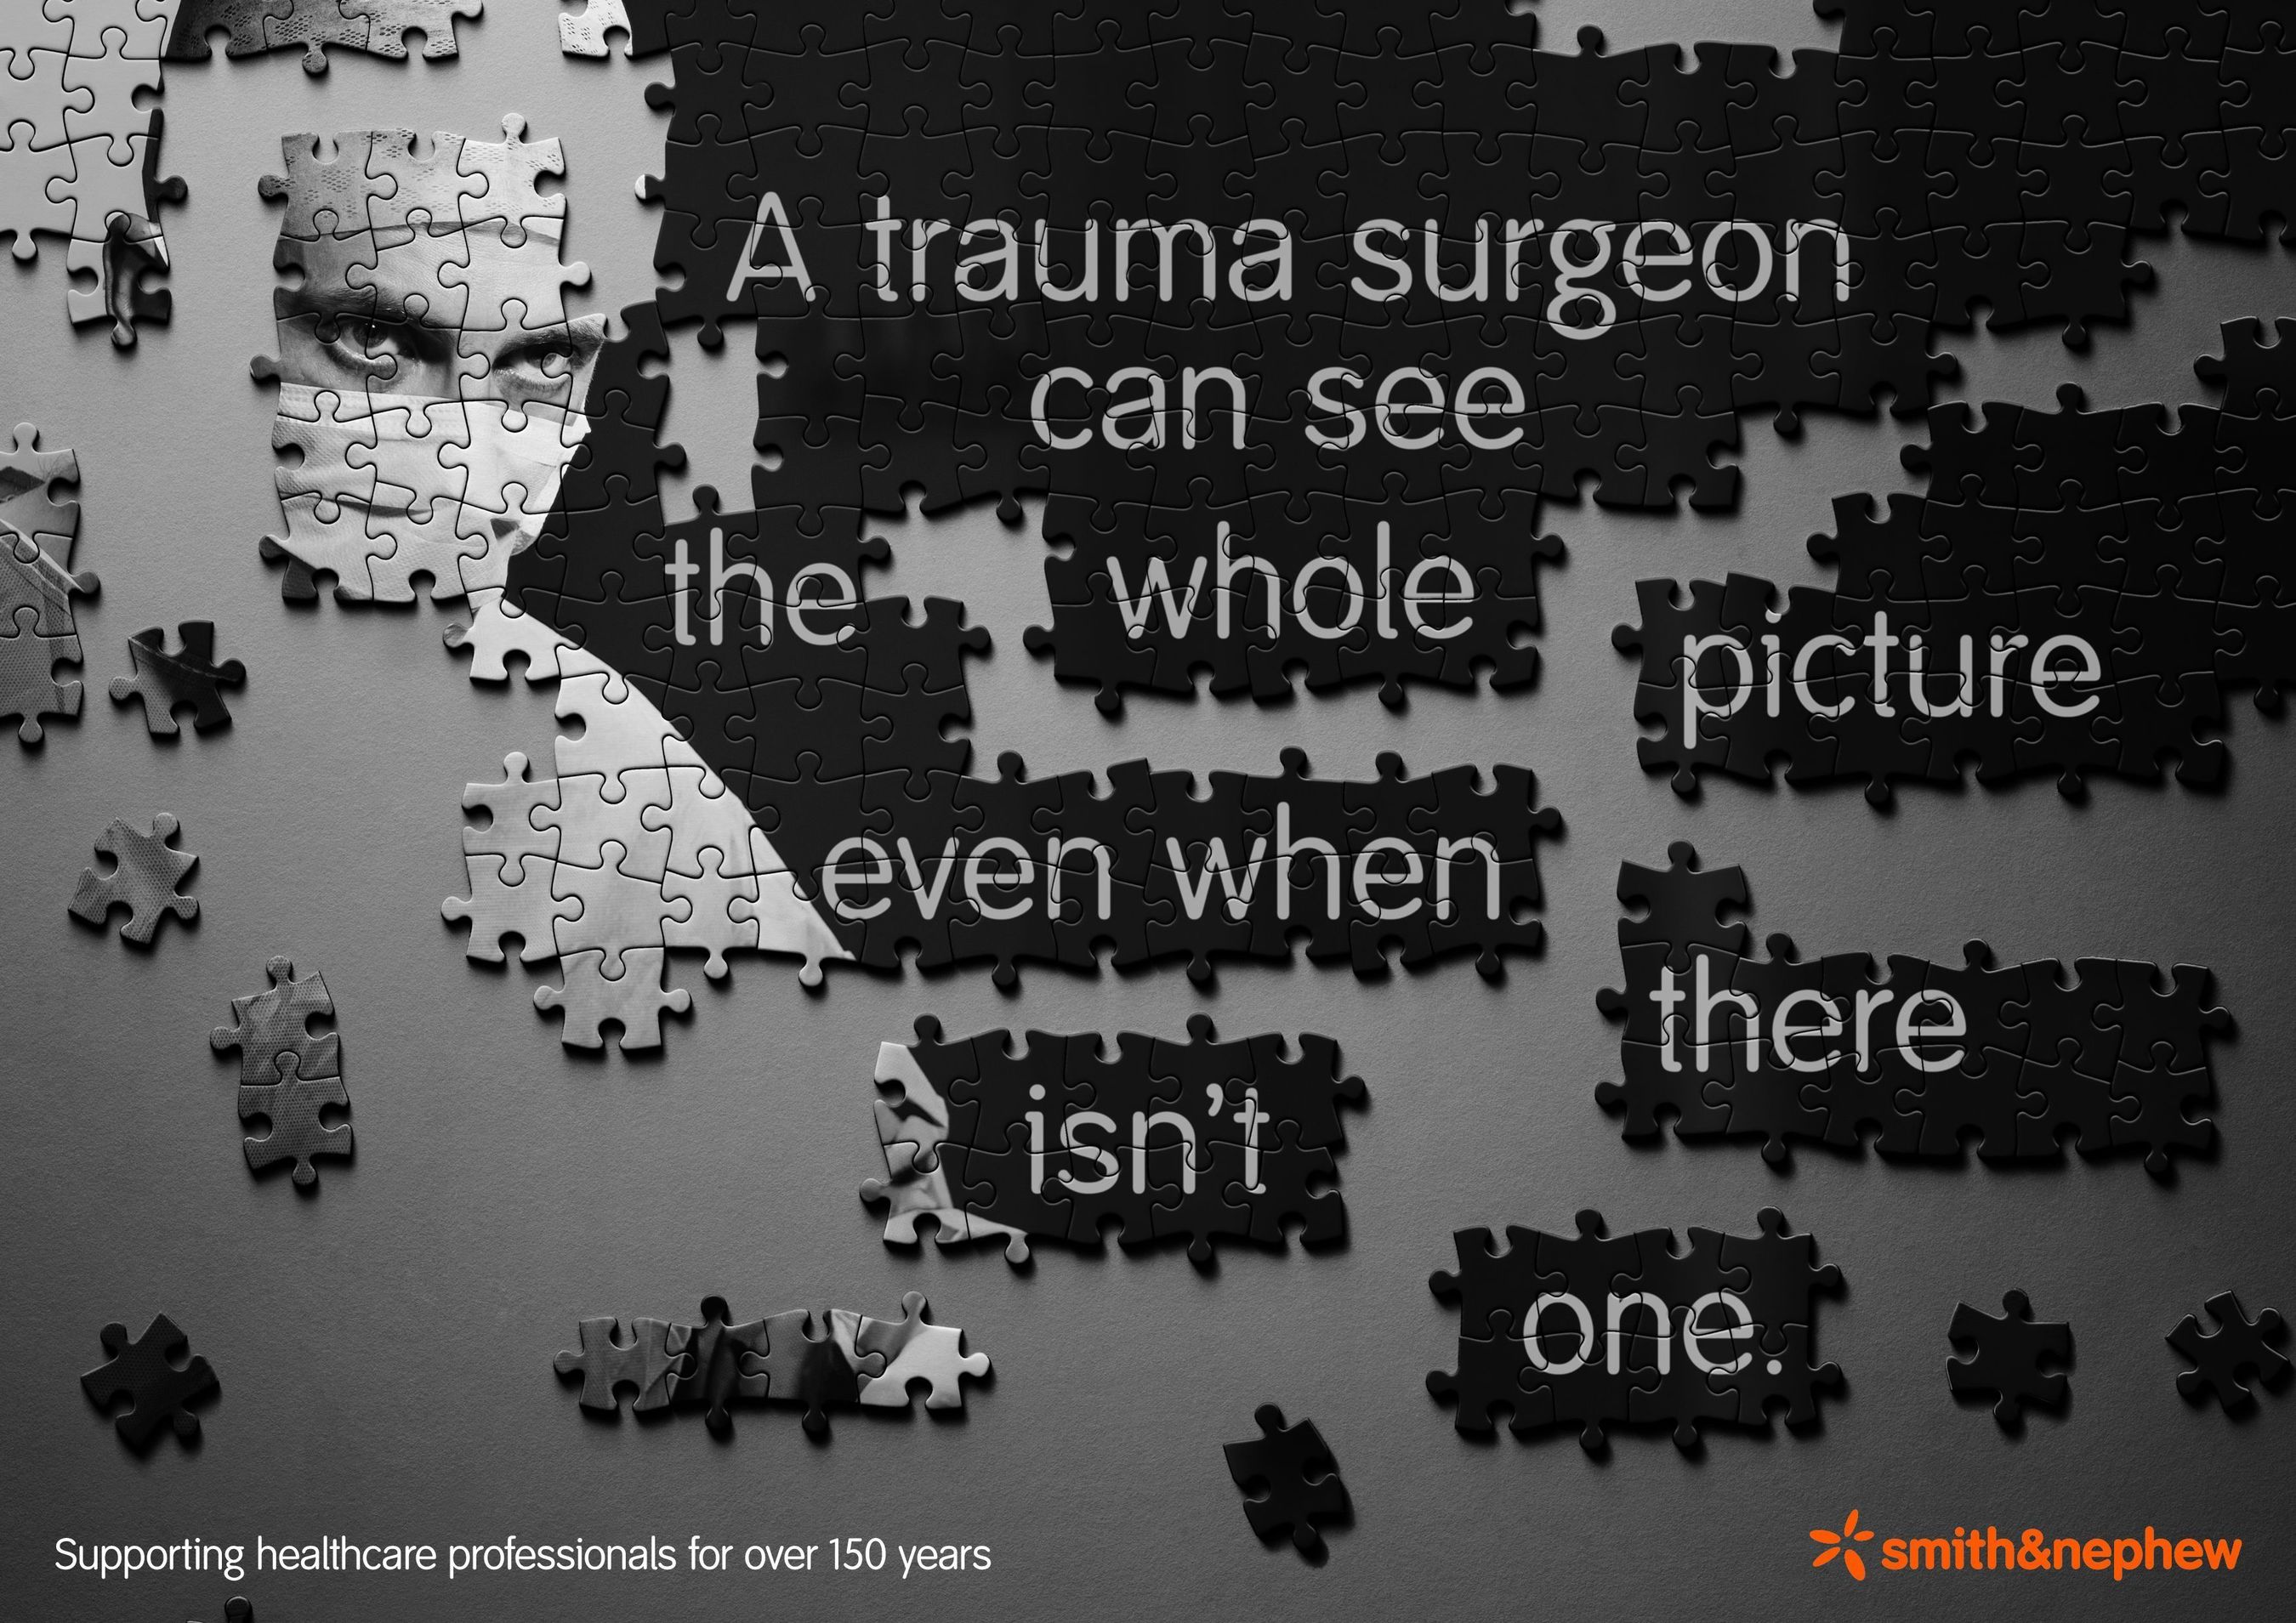 Championing our healthcare professionals: Smith & Nephew launches awareness campaign (PRNewsFoto/Smith & Nephew)